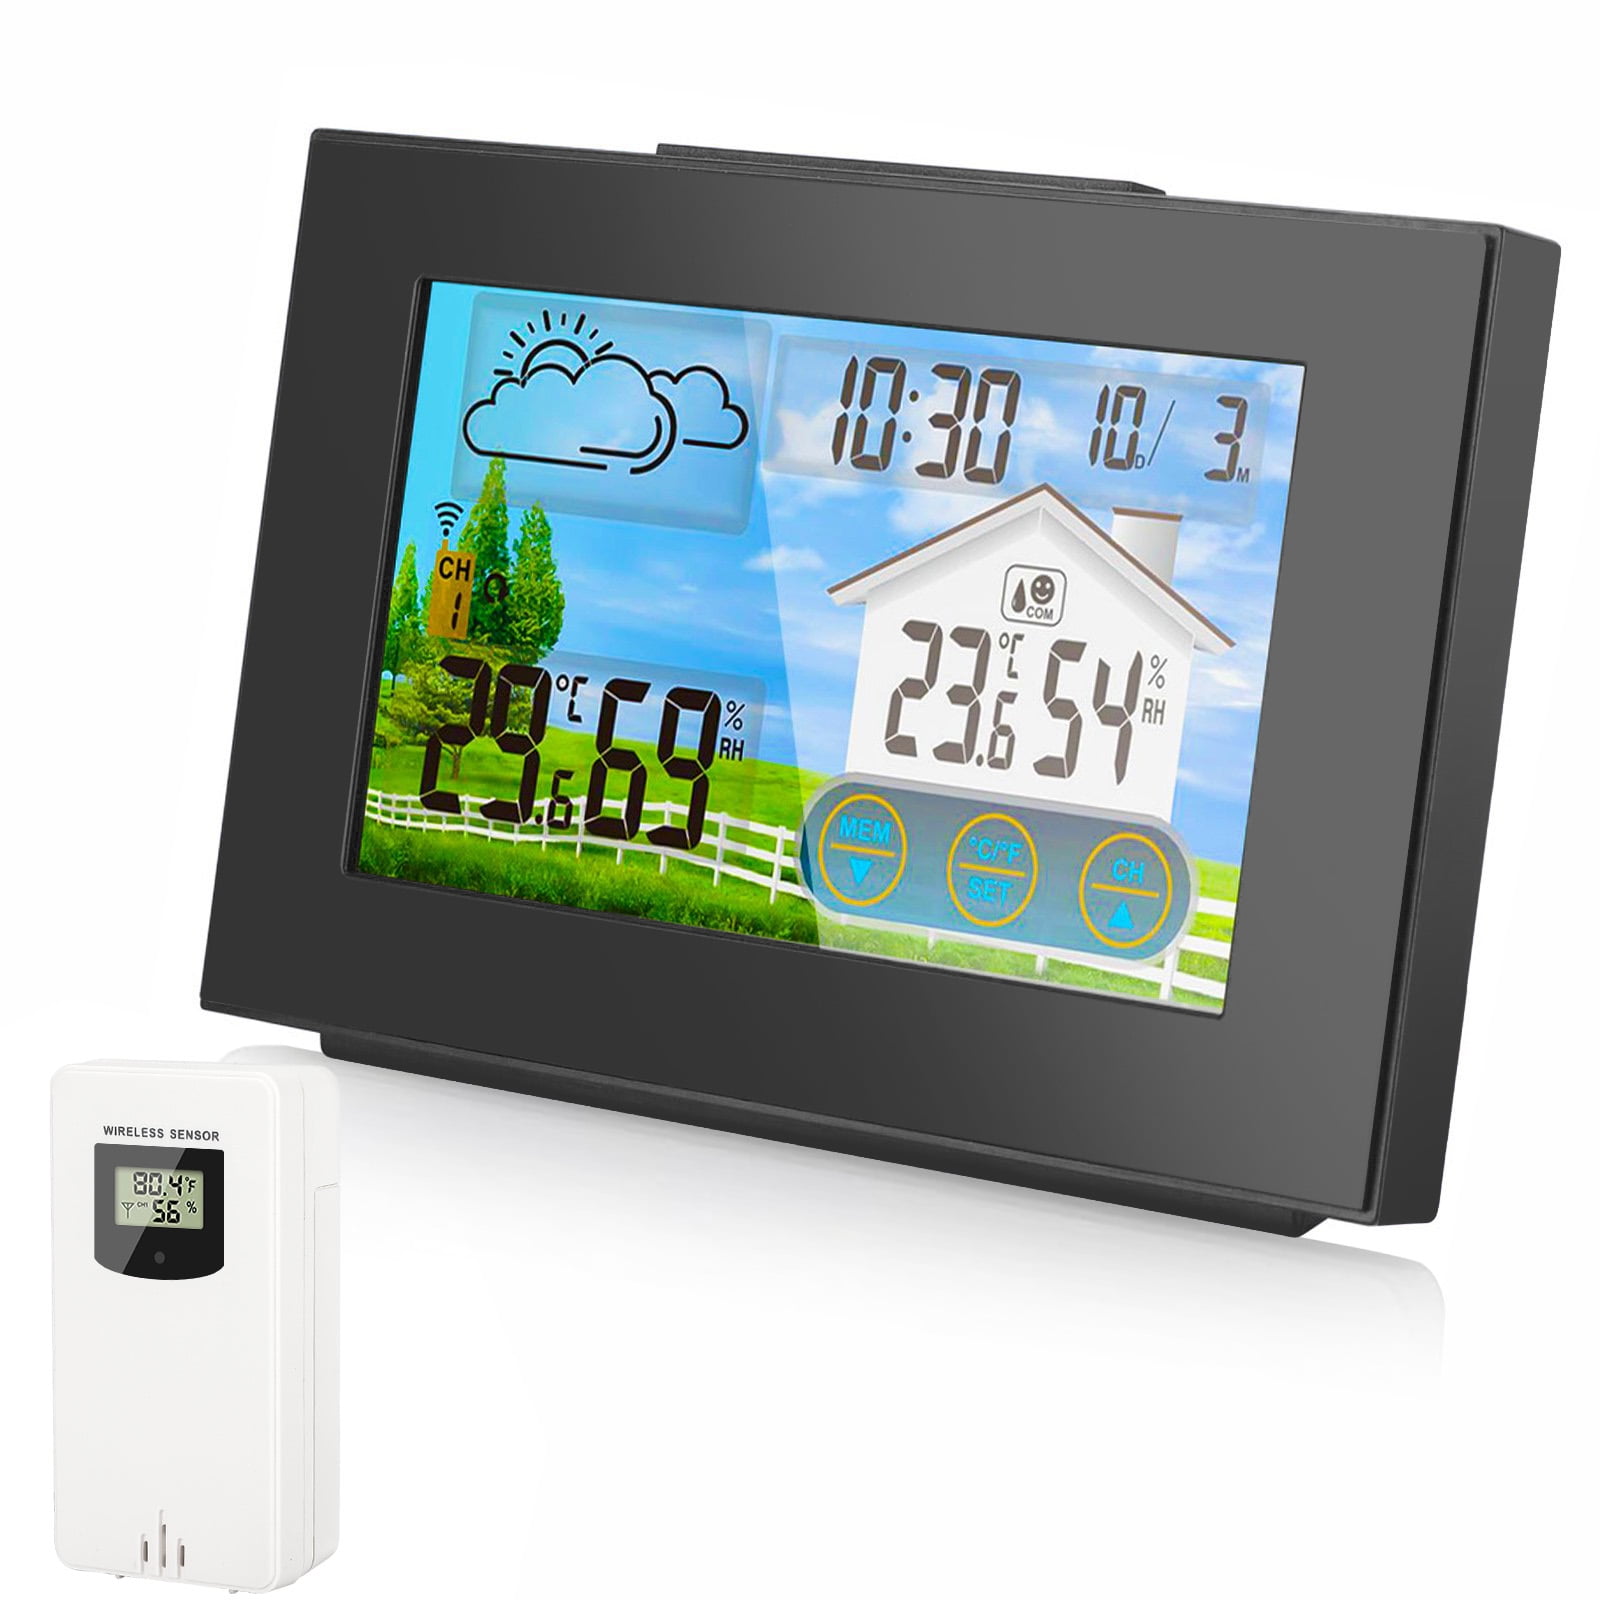 Wireless Weather Station Atomic Radio Controlled LCD Alarm Clock Color Display 